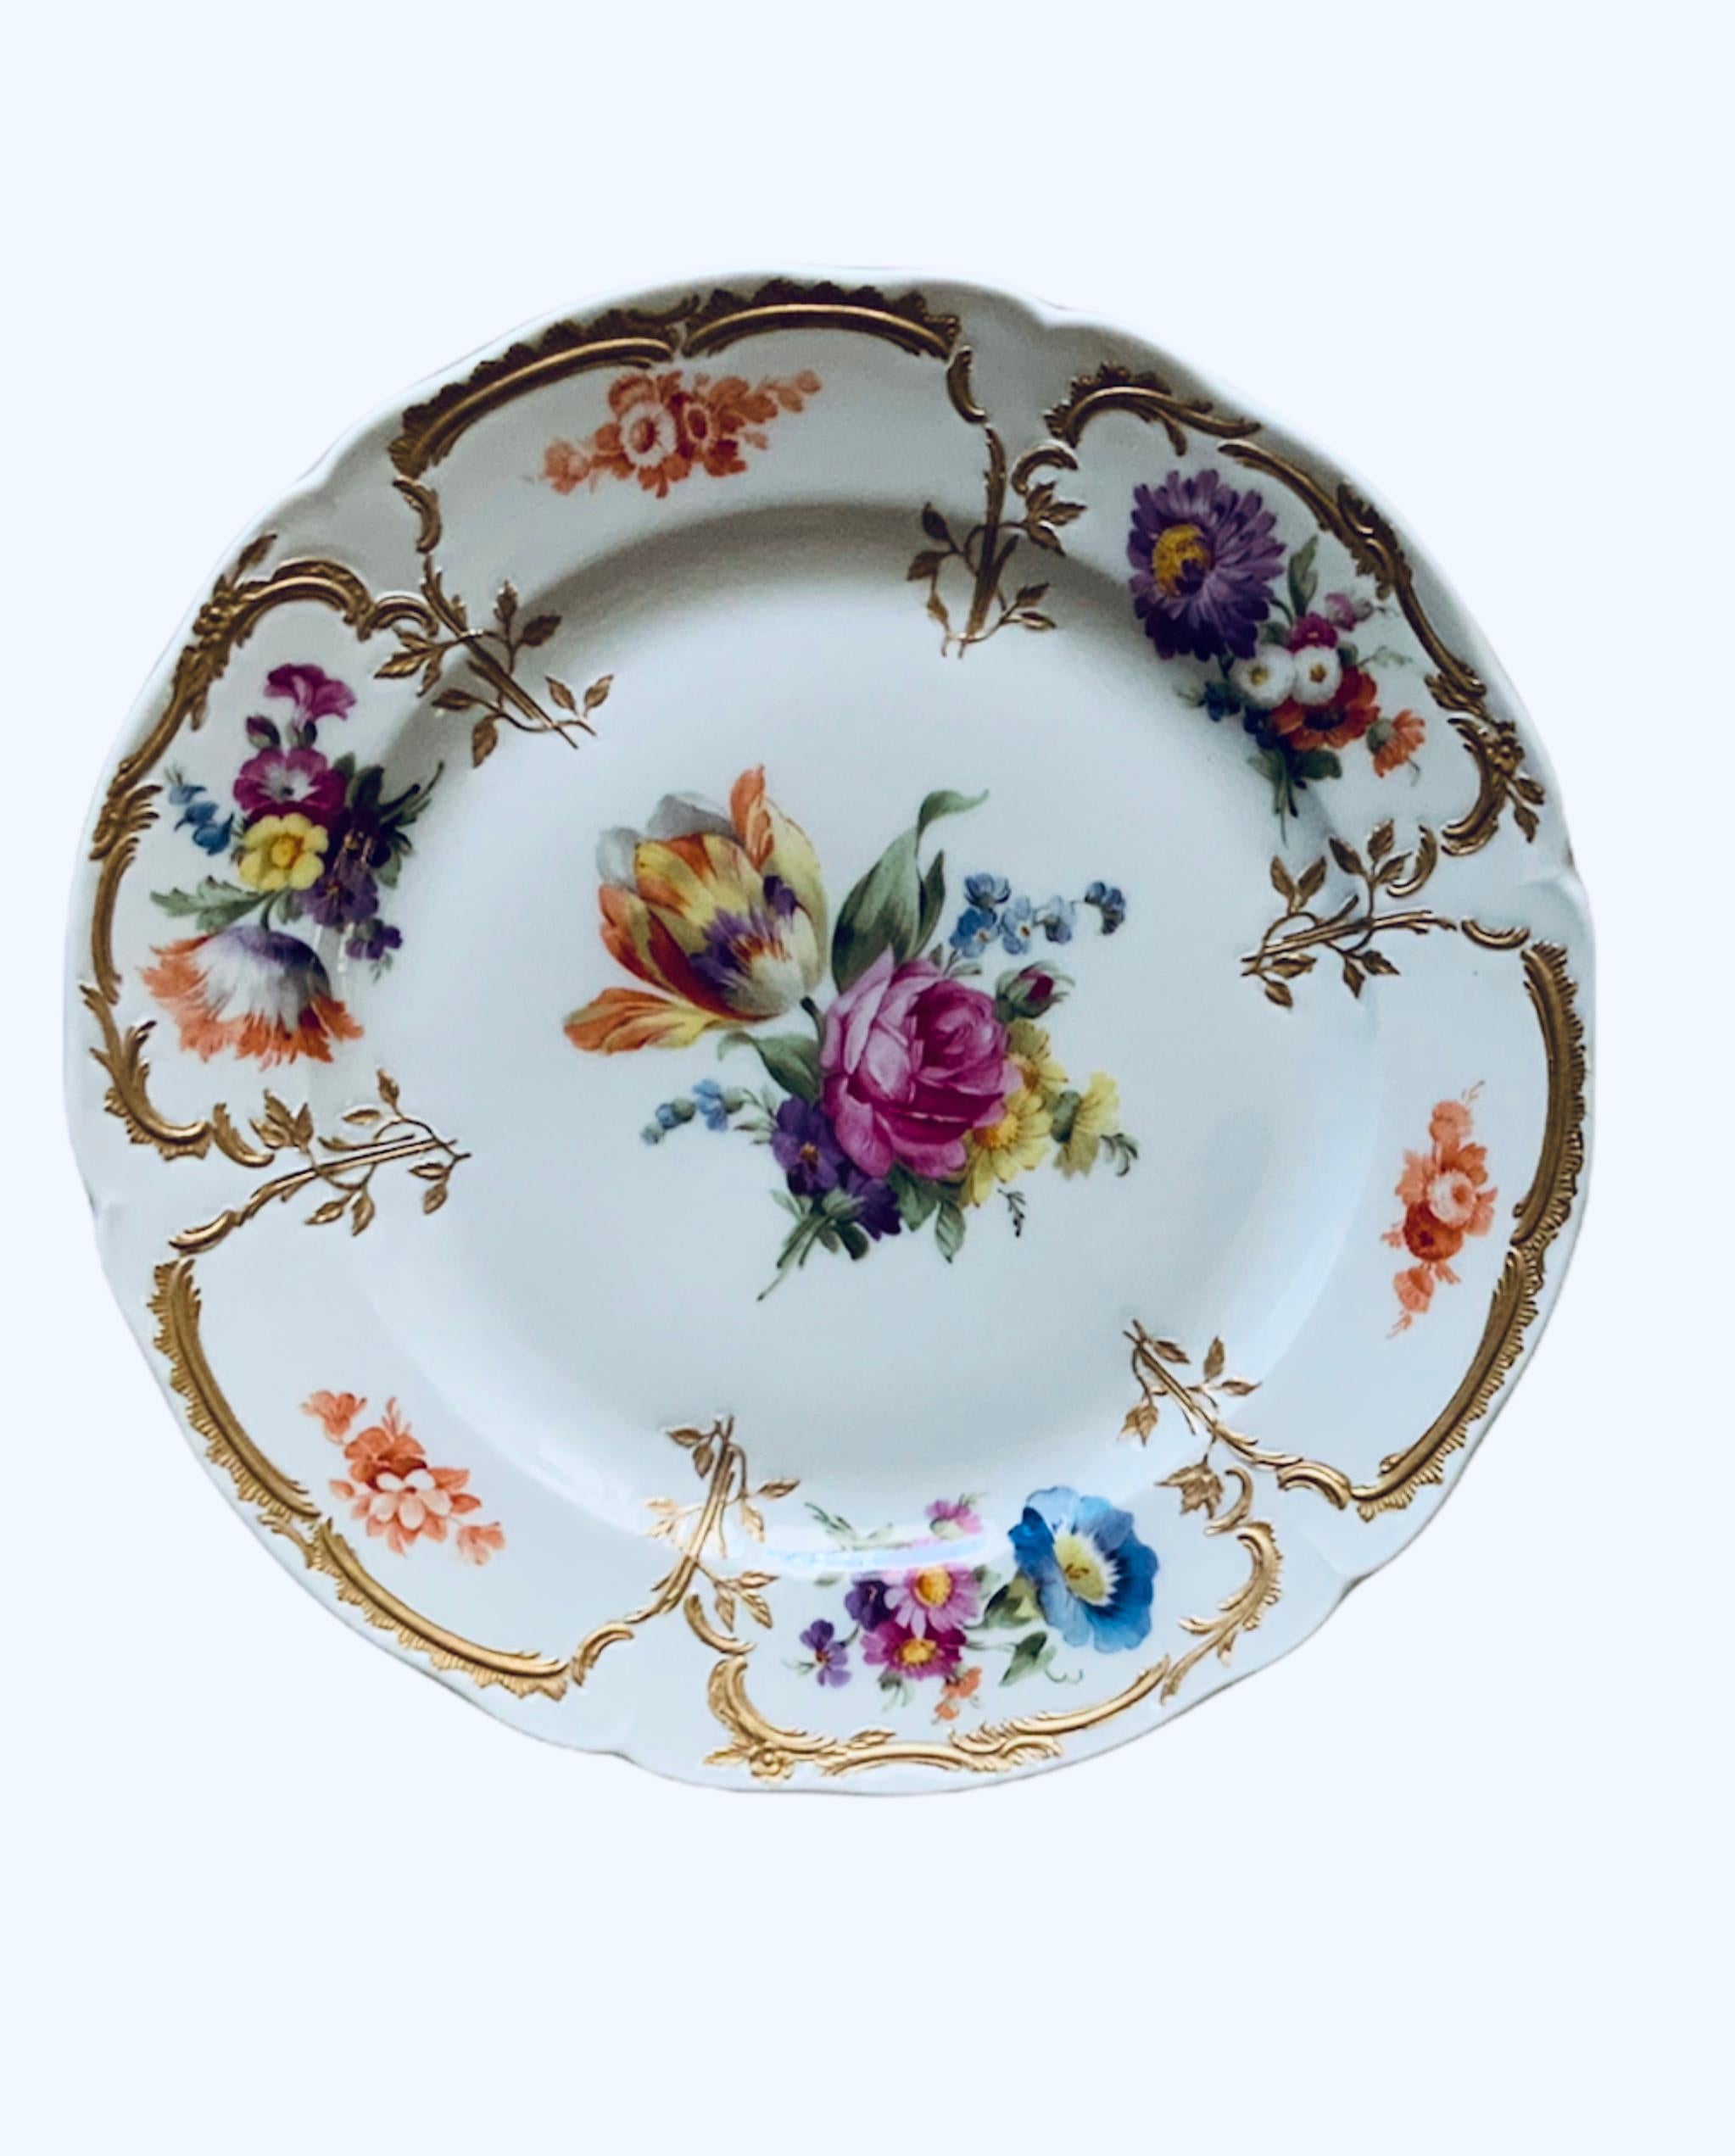 This a set of KPM Porcelain Neuzeriat plate and two small bowls. The Neuzeriat plate depicts a large bouquet of flowers in the center, then in the border there are smaller bouquets alternated with tiny bouquets flowers. This is embellished by some